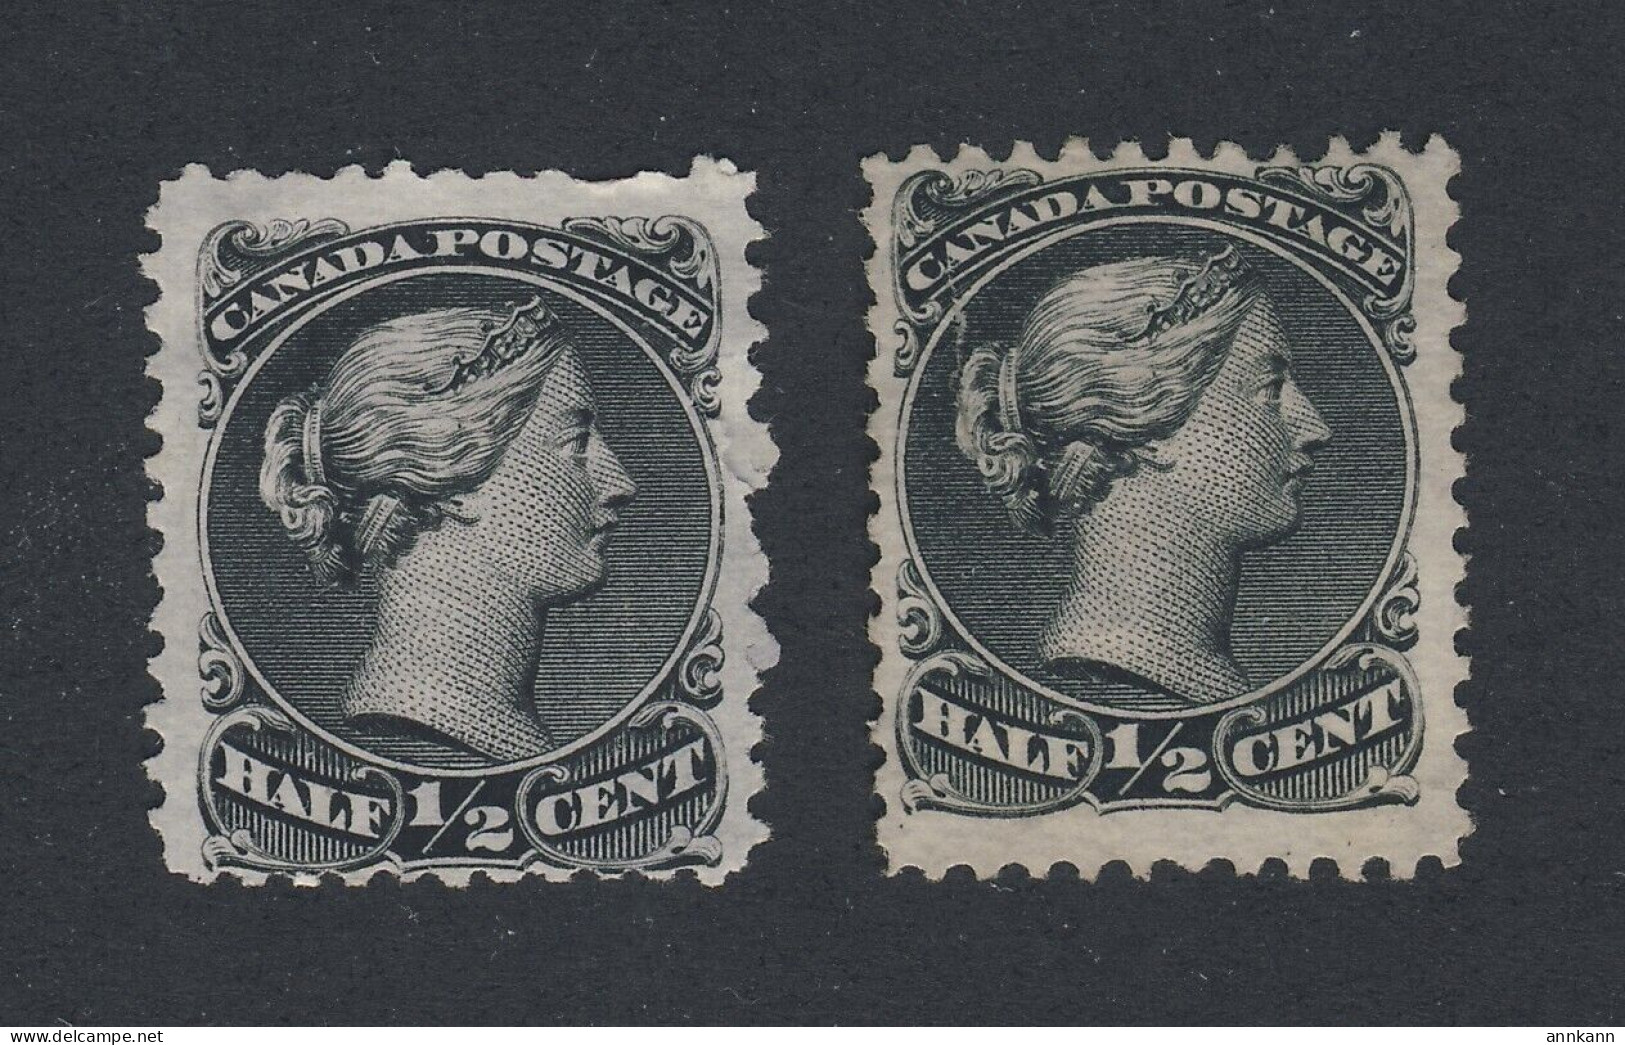 2x Canada Large Queen Stamps; 2x #21-1/2c 1xF/VF 1xF MNG Guide Value = $150.00 - Unused Stamps